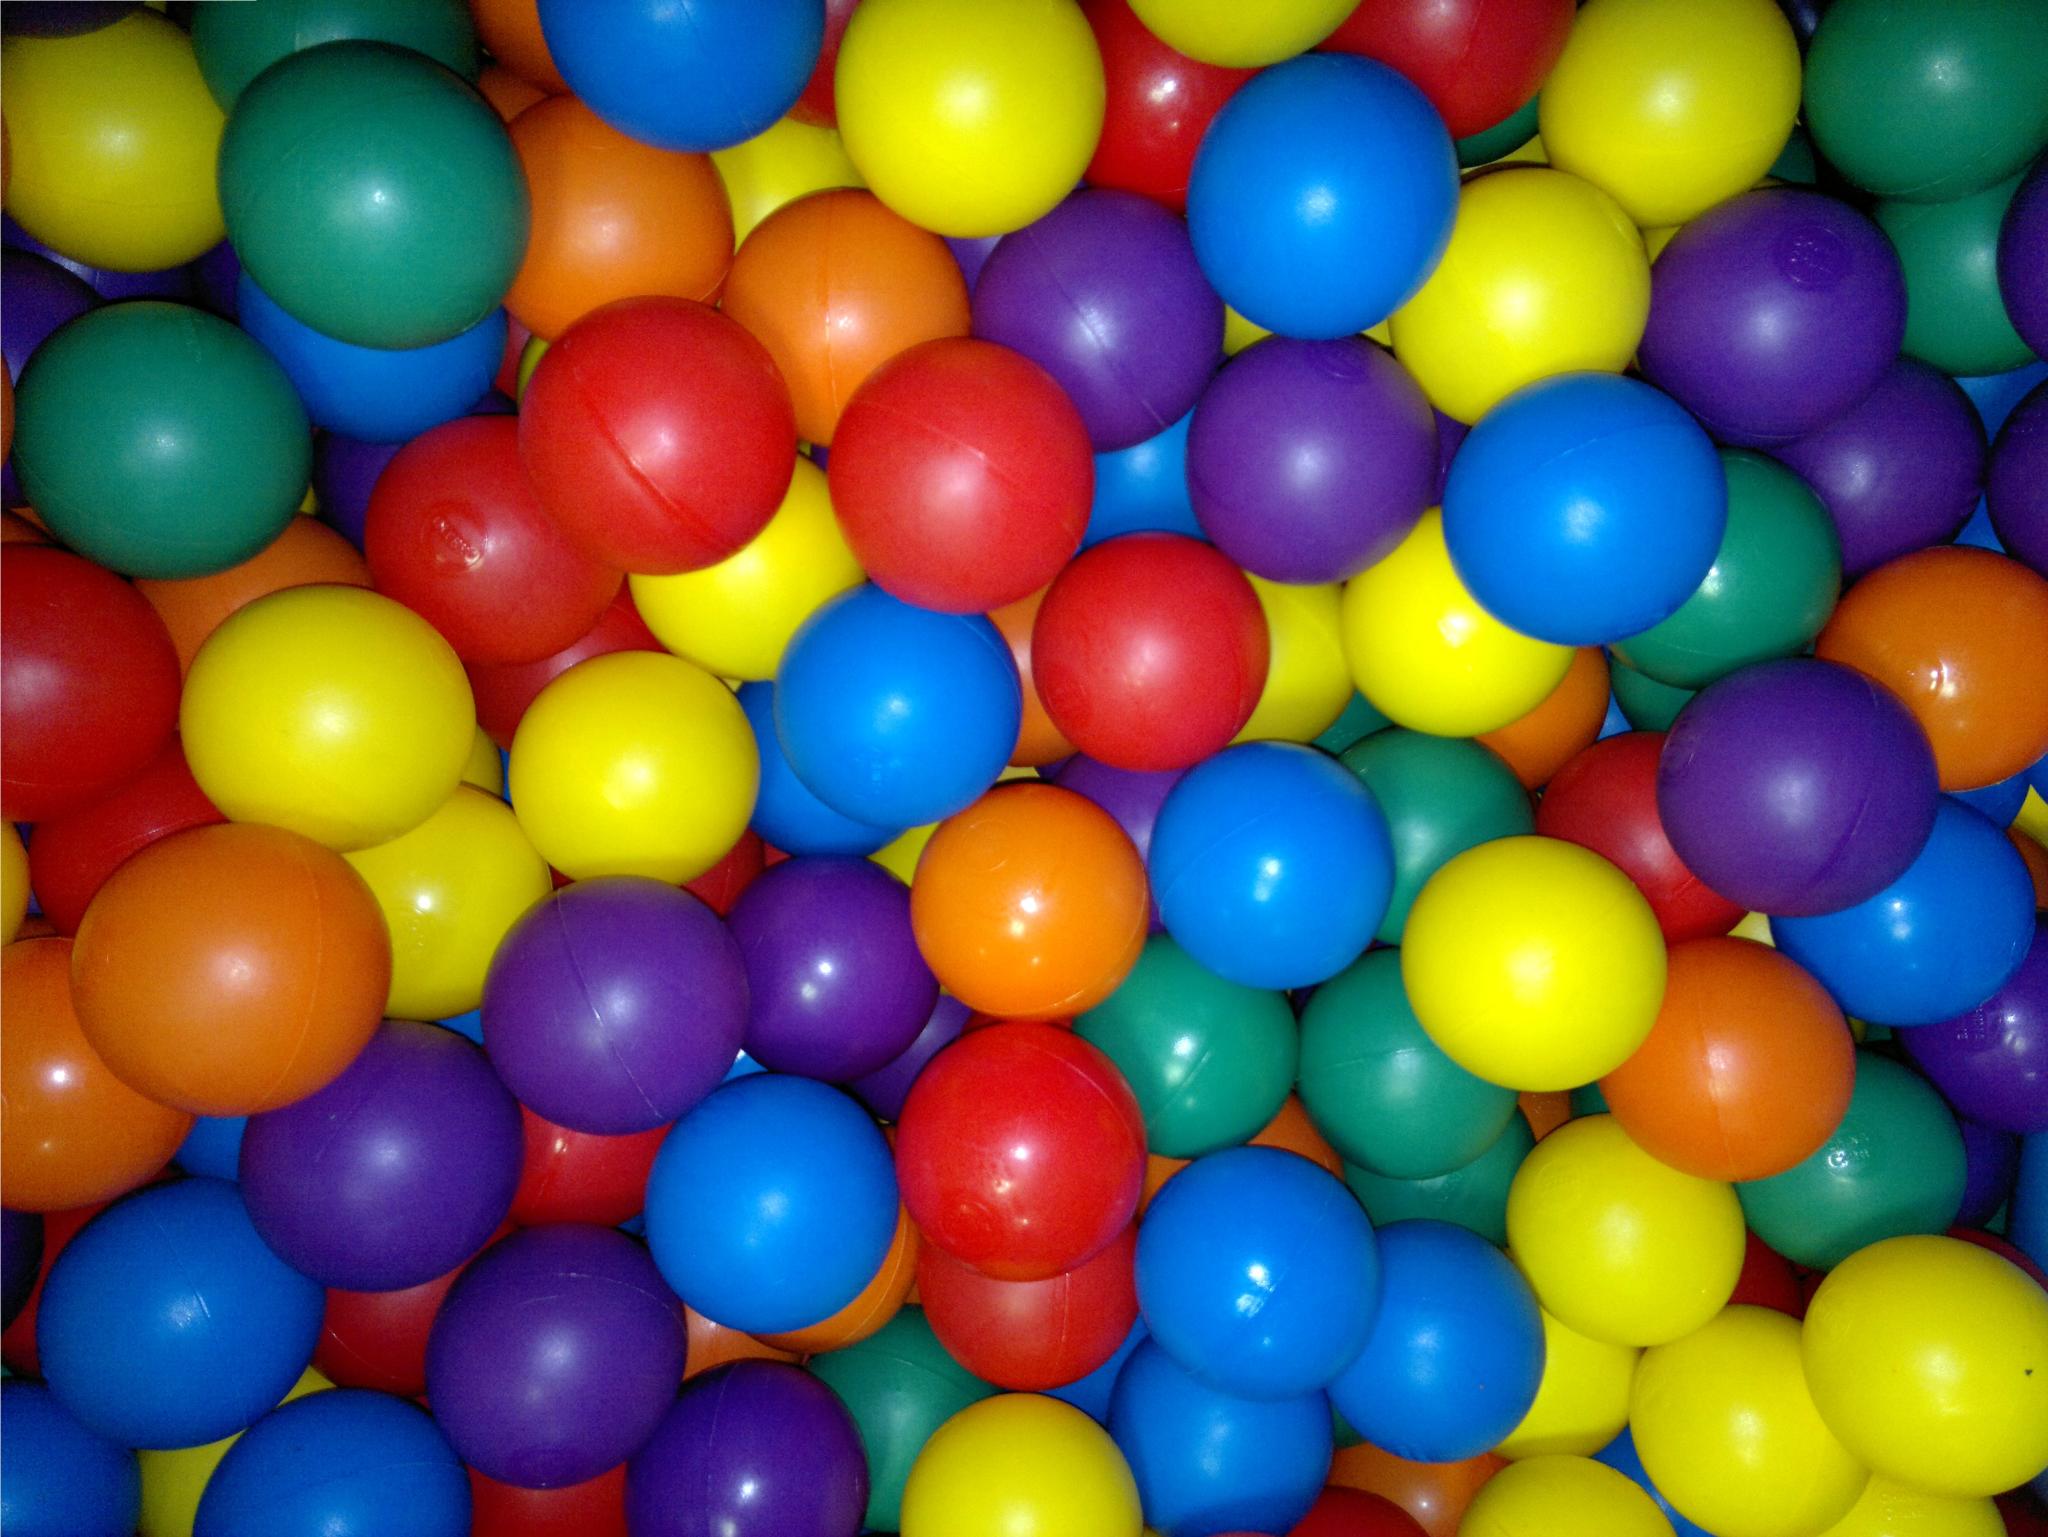 http://upload.wikimedia.org/wikipedia/commons/b/bf/Toy_balls_with_different_Colors.jpg